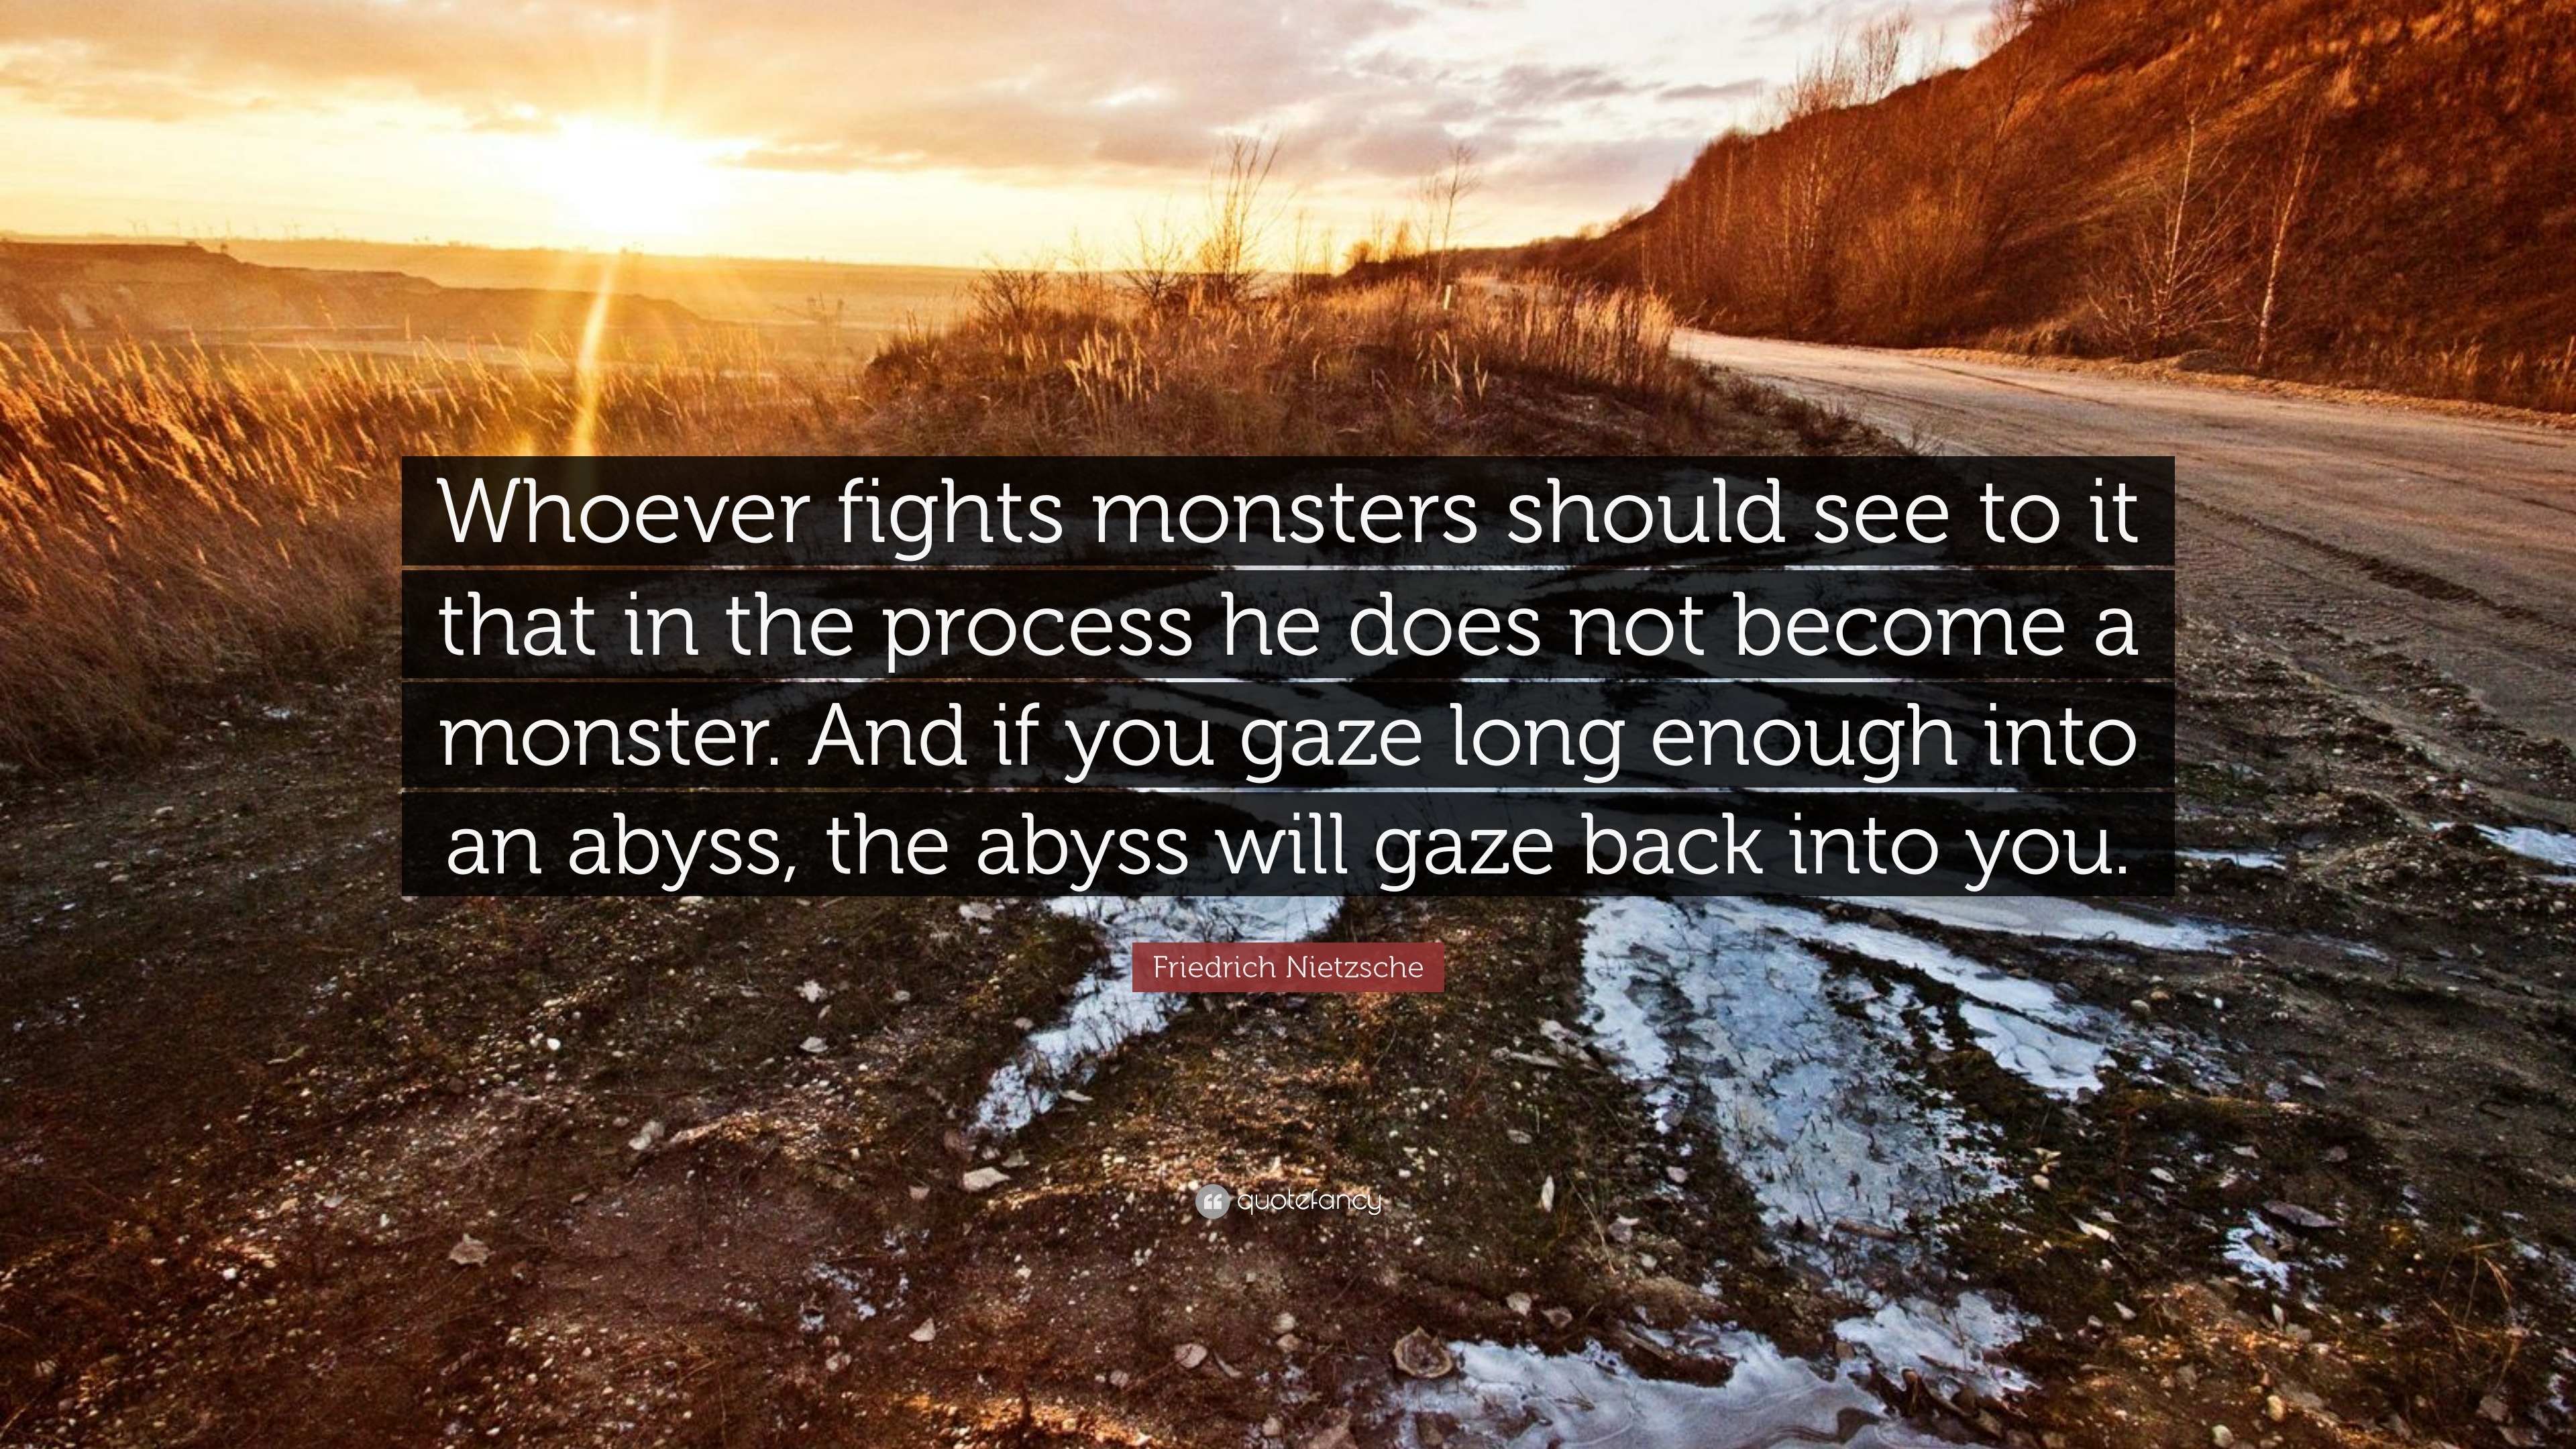 9861-Friedrich-Nietzsche-Quote-Whoever-fights-monsters-should-see-to-it.jpg